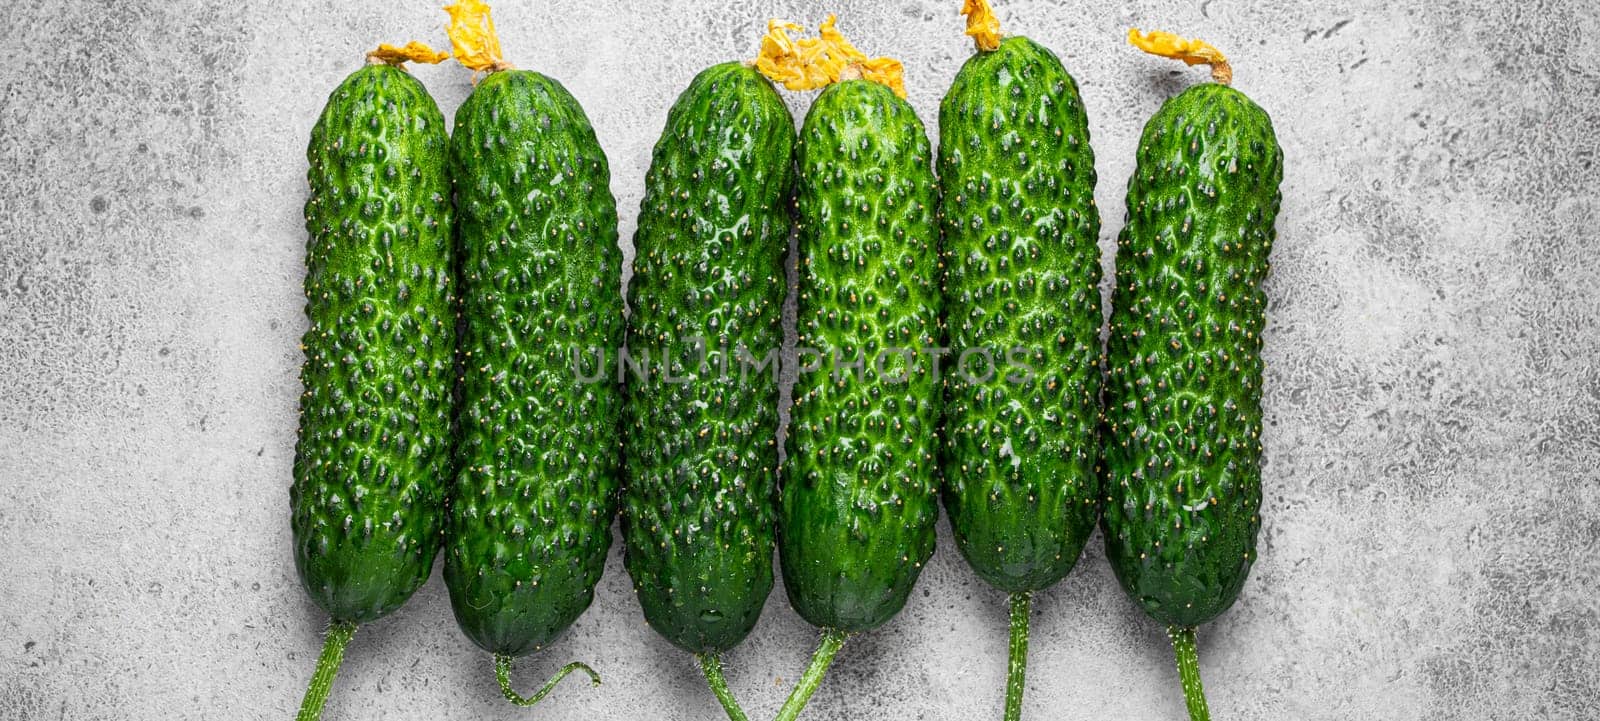 Fresh raw organic farmer cucumbers with leafs arranged on grey rustic stone background top view, healthy cucumbers in balanced nutrition and cooking concept